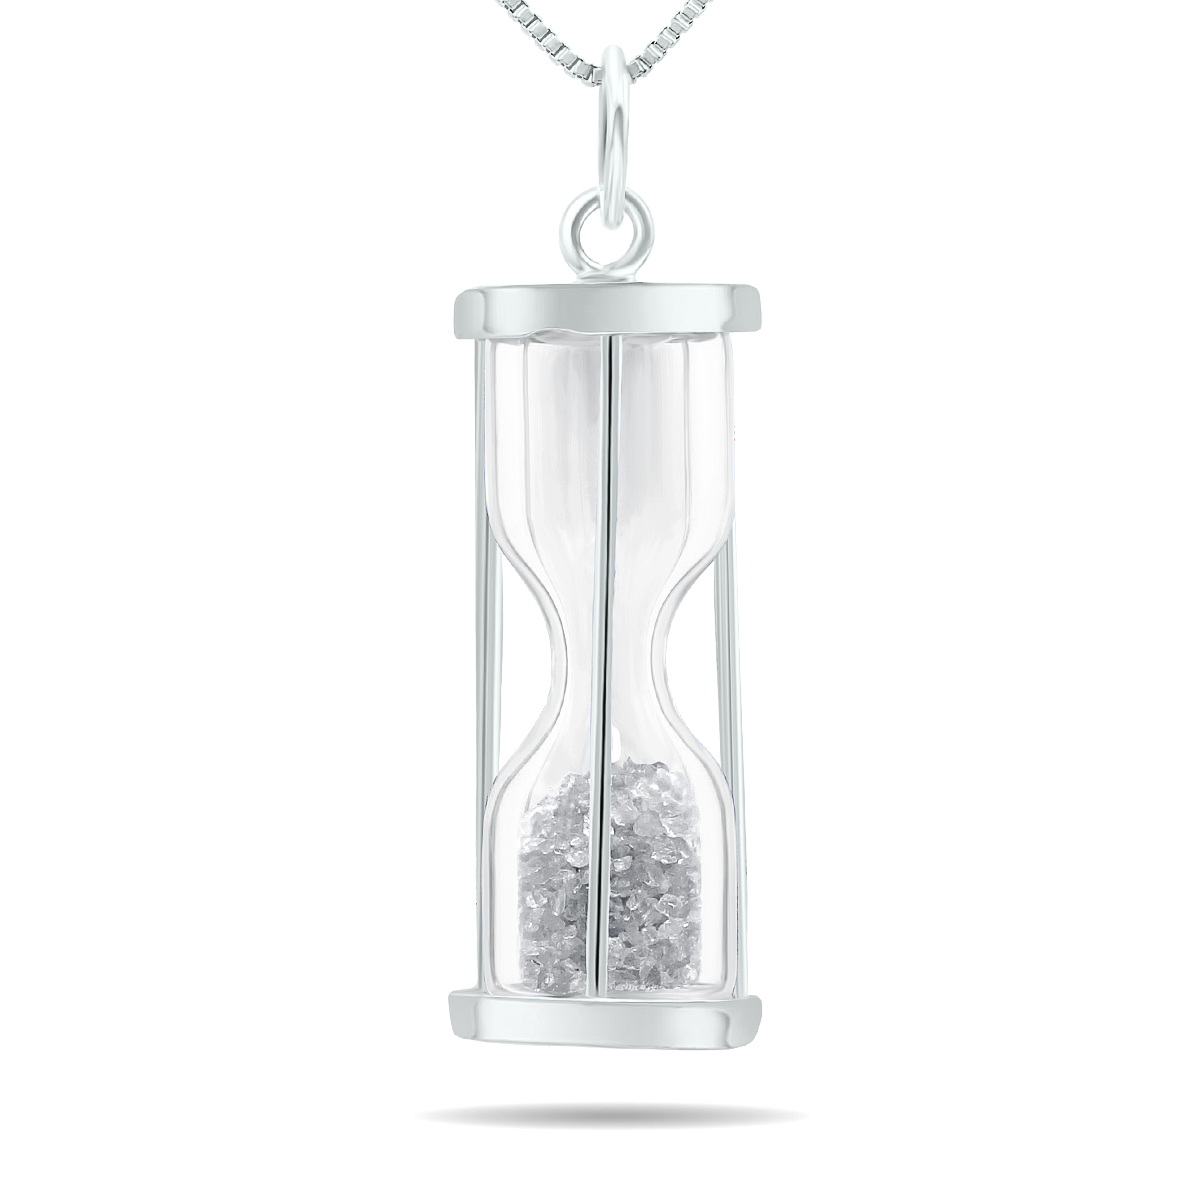 Tooth Fairy Pixie Dust Gift - 1/2 Carat TW April Birthstone Diamond Dust Time in a Bottle Pendant in.925 Sterling Silver